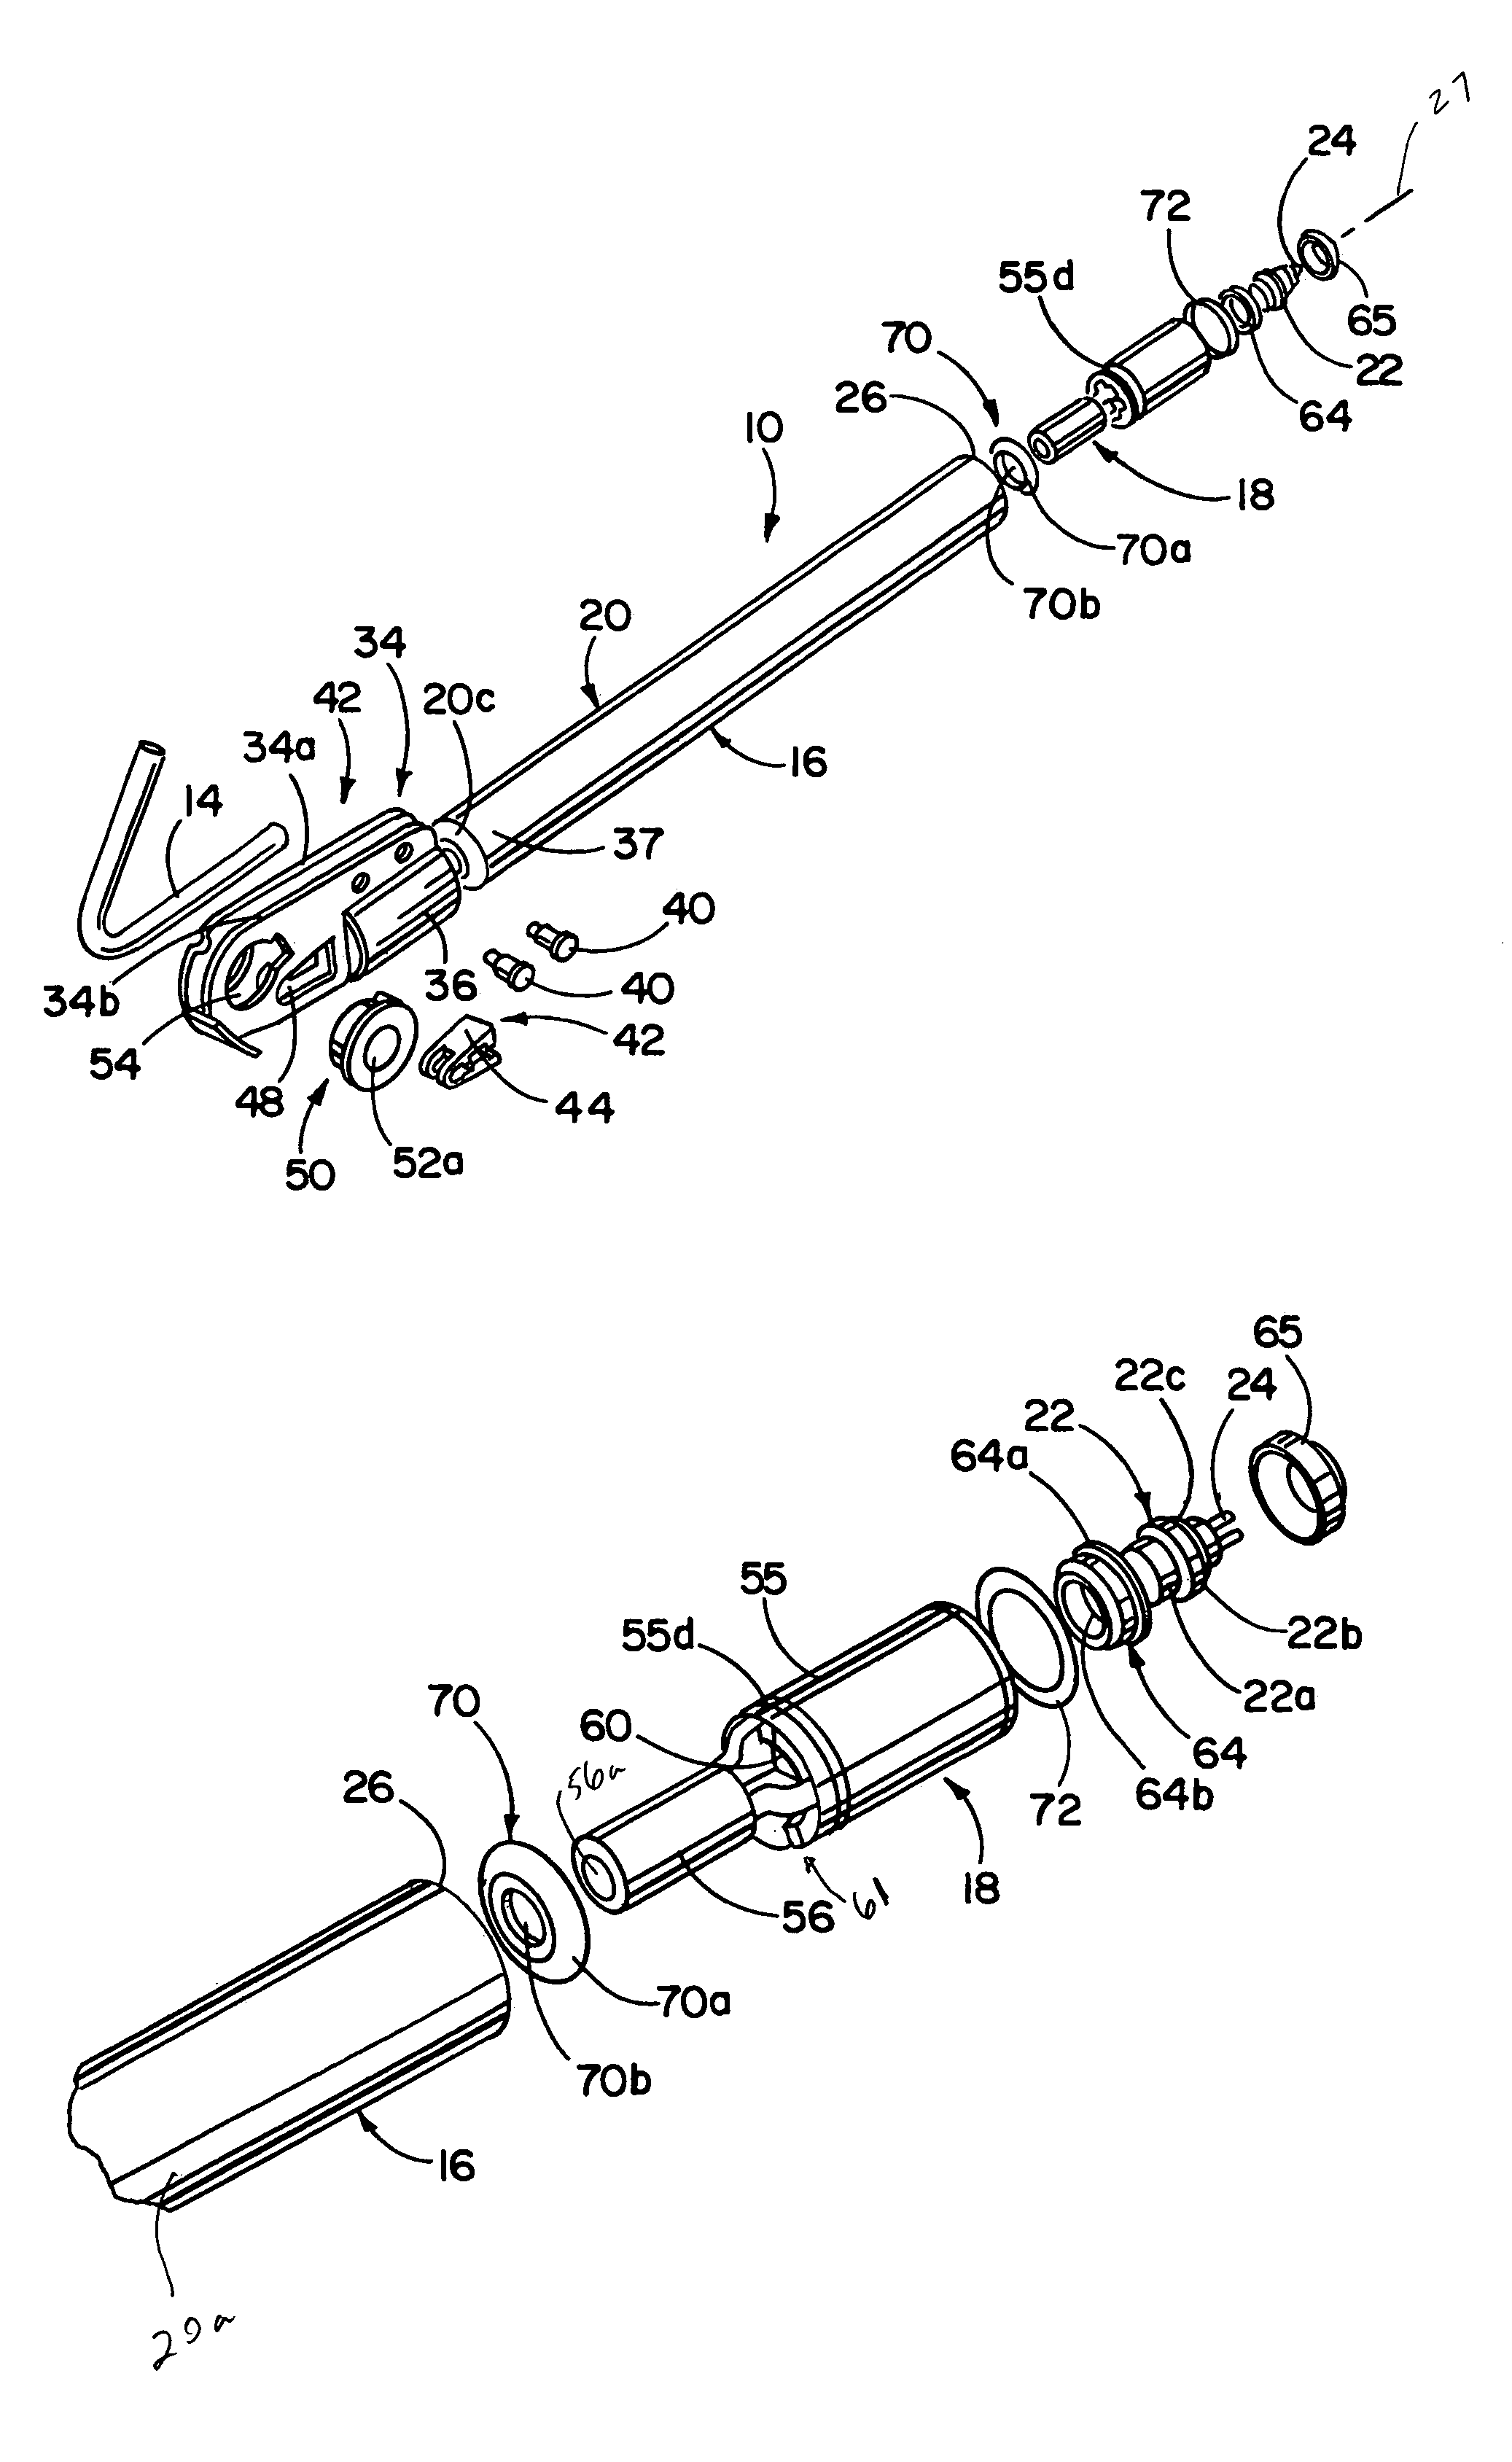 Pretensioner with integrated gas generator